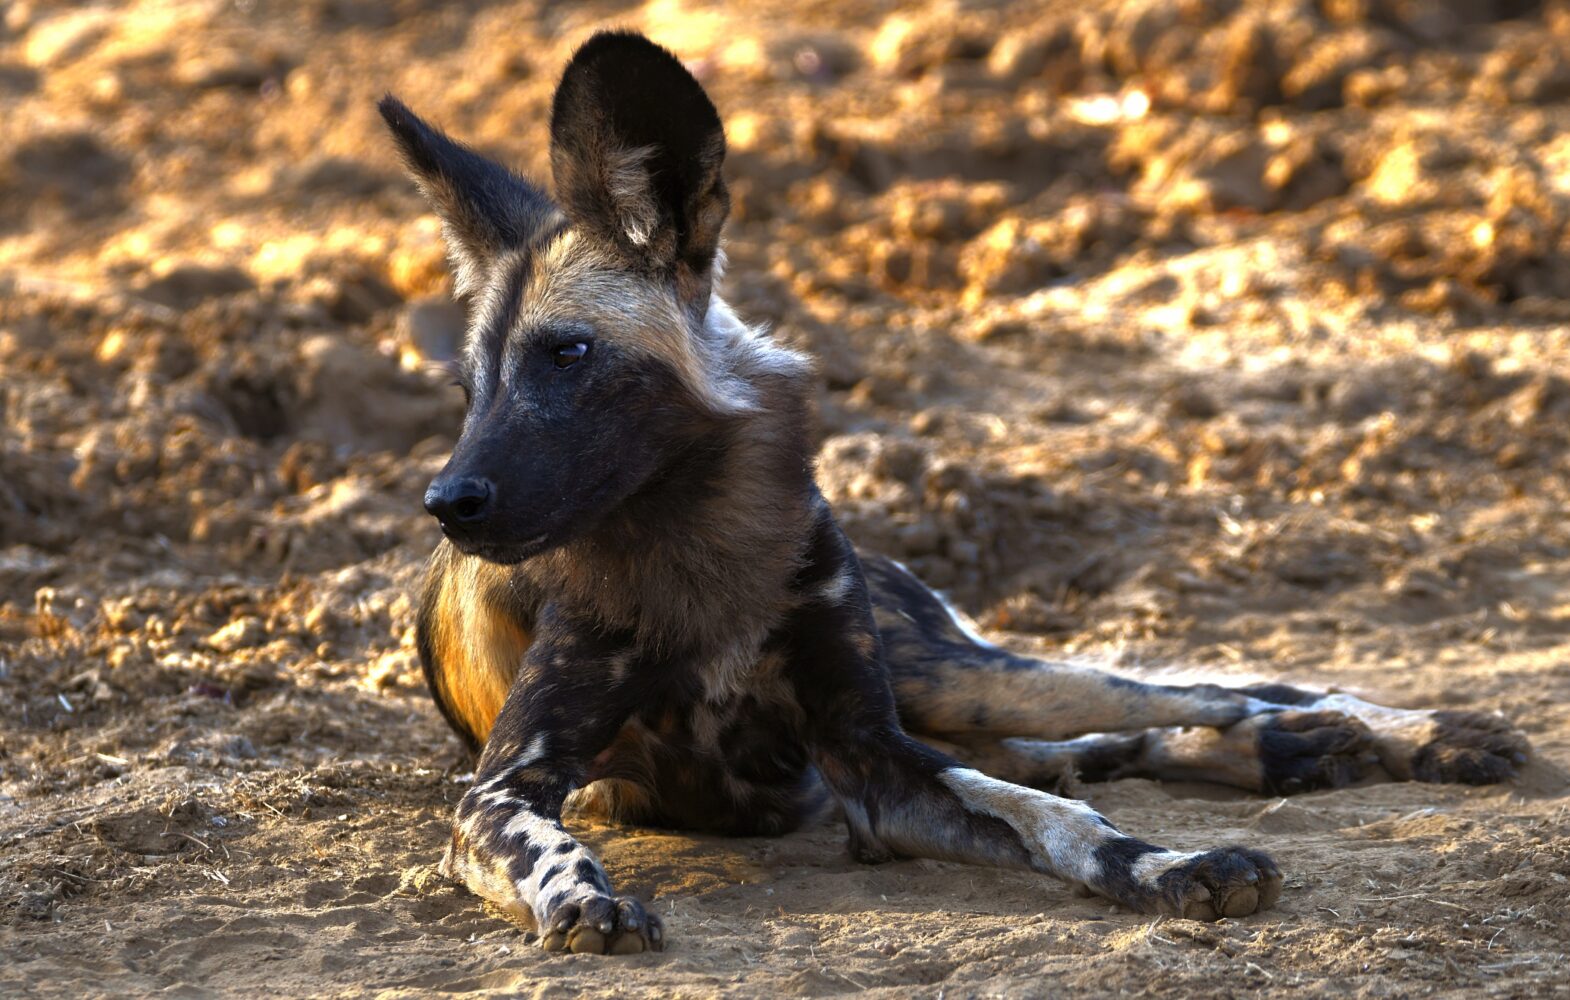 The African Wild Dog: Discovering the Unique Social Behavior and Hunting Strategies